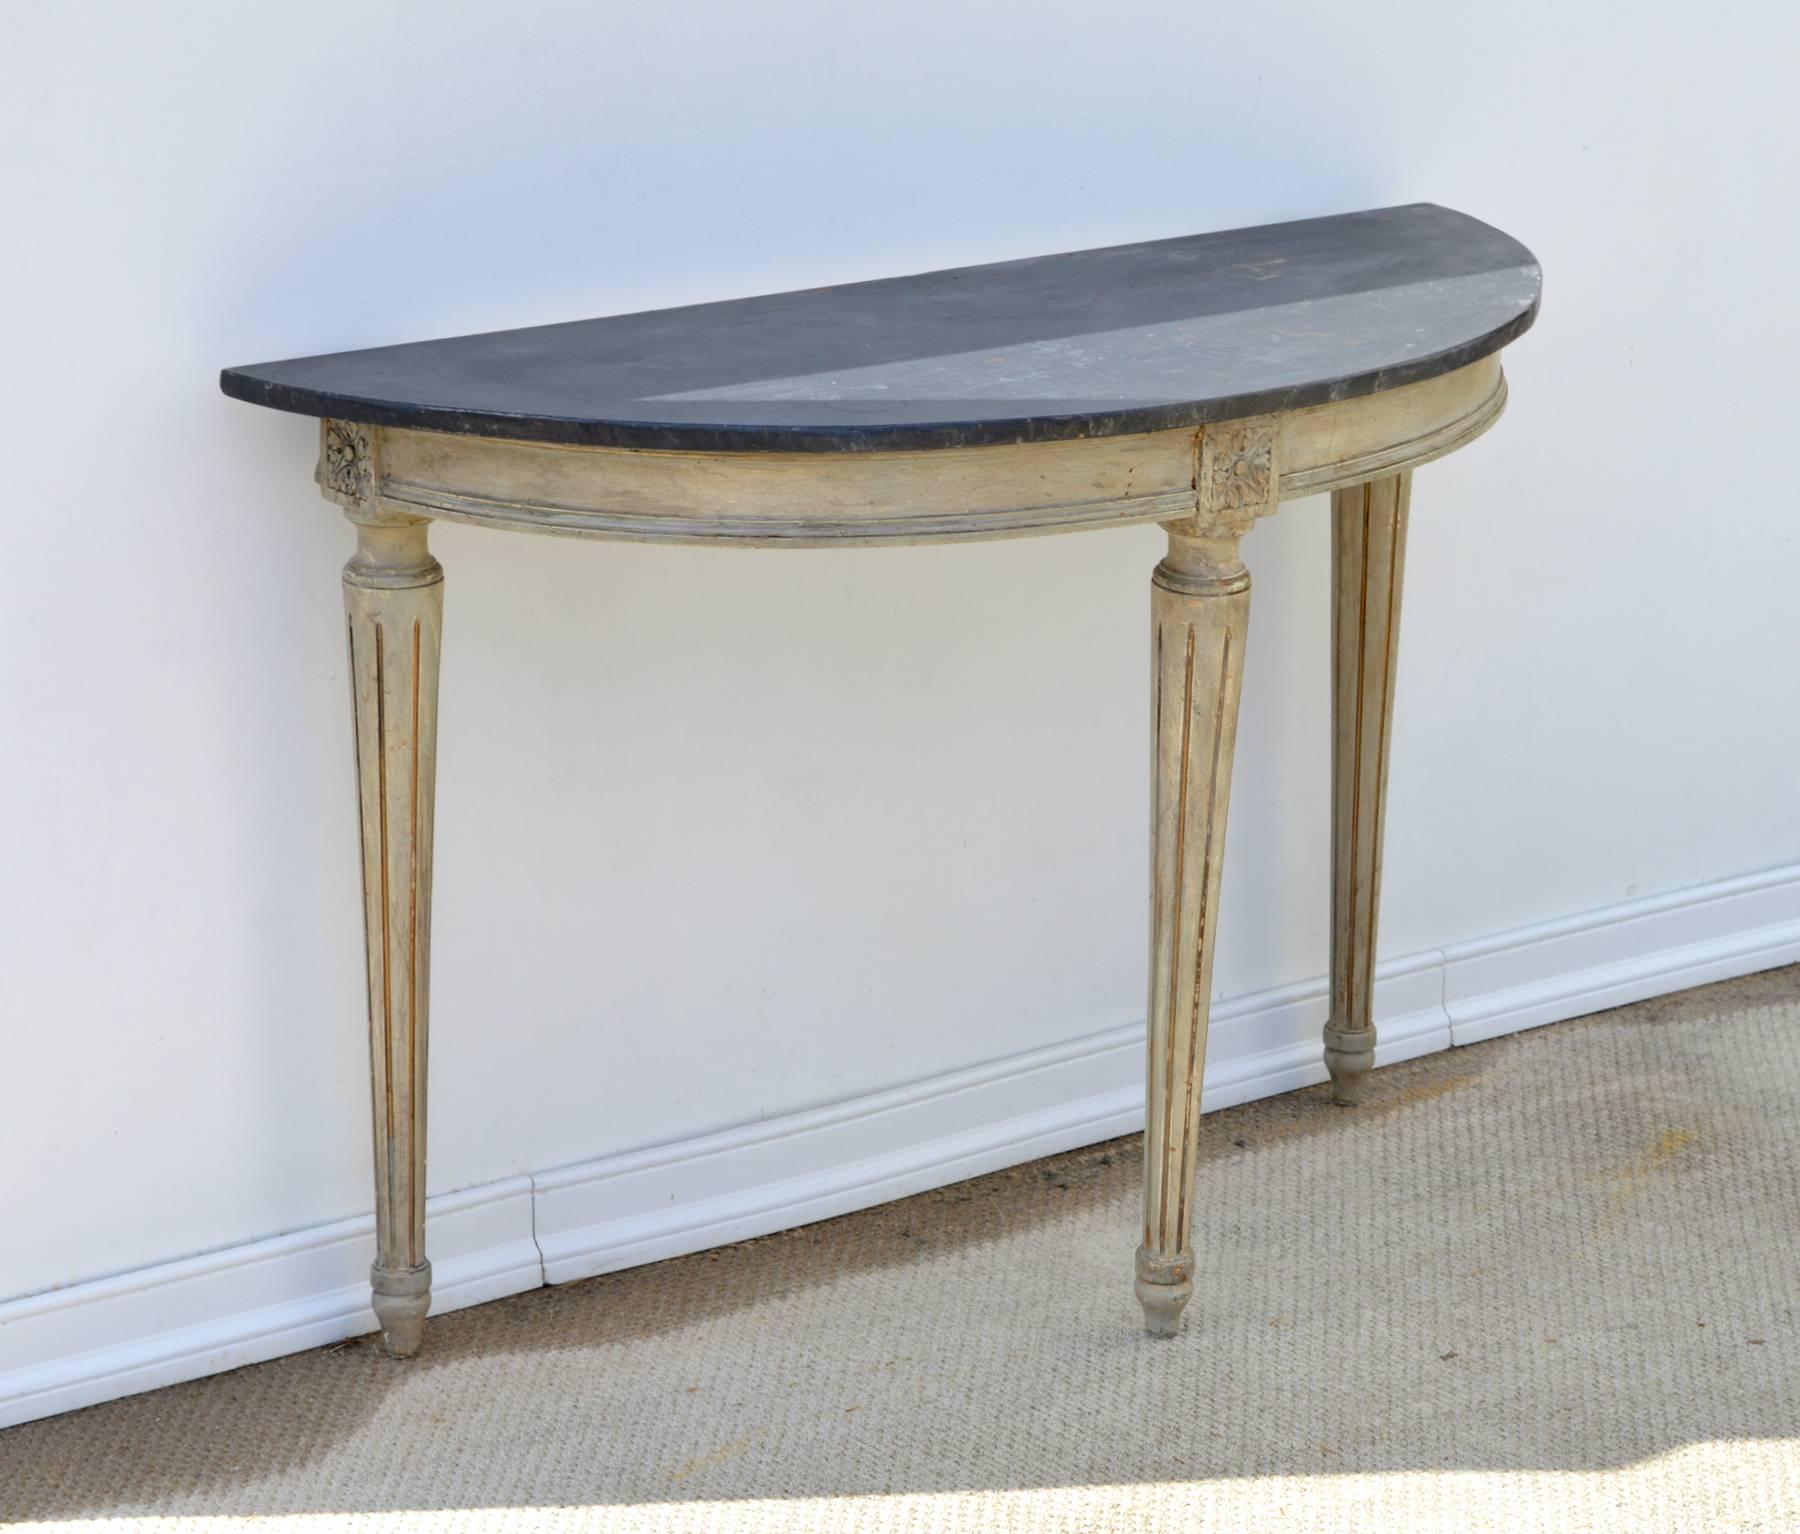 A stunning painted demilune console table in the Louis XVI taste. The worn dark grey wooden top proudly perches atop a simple ogee apron residing on heavily tapered and stop reeded legs. The circa 1960s table has both original and recent layers of